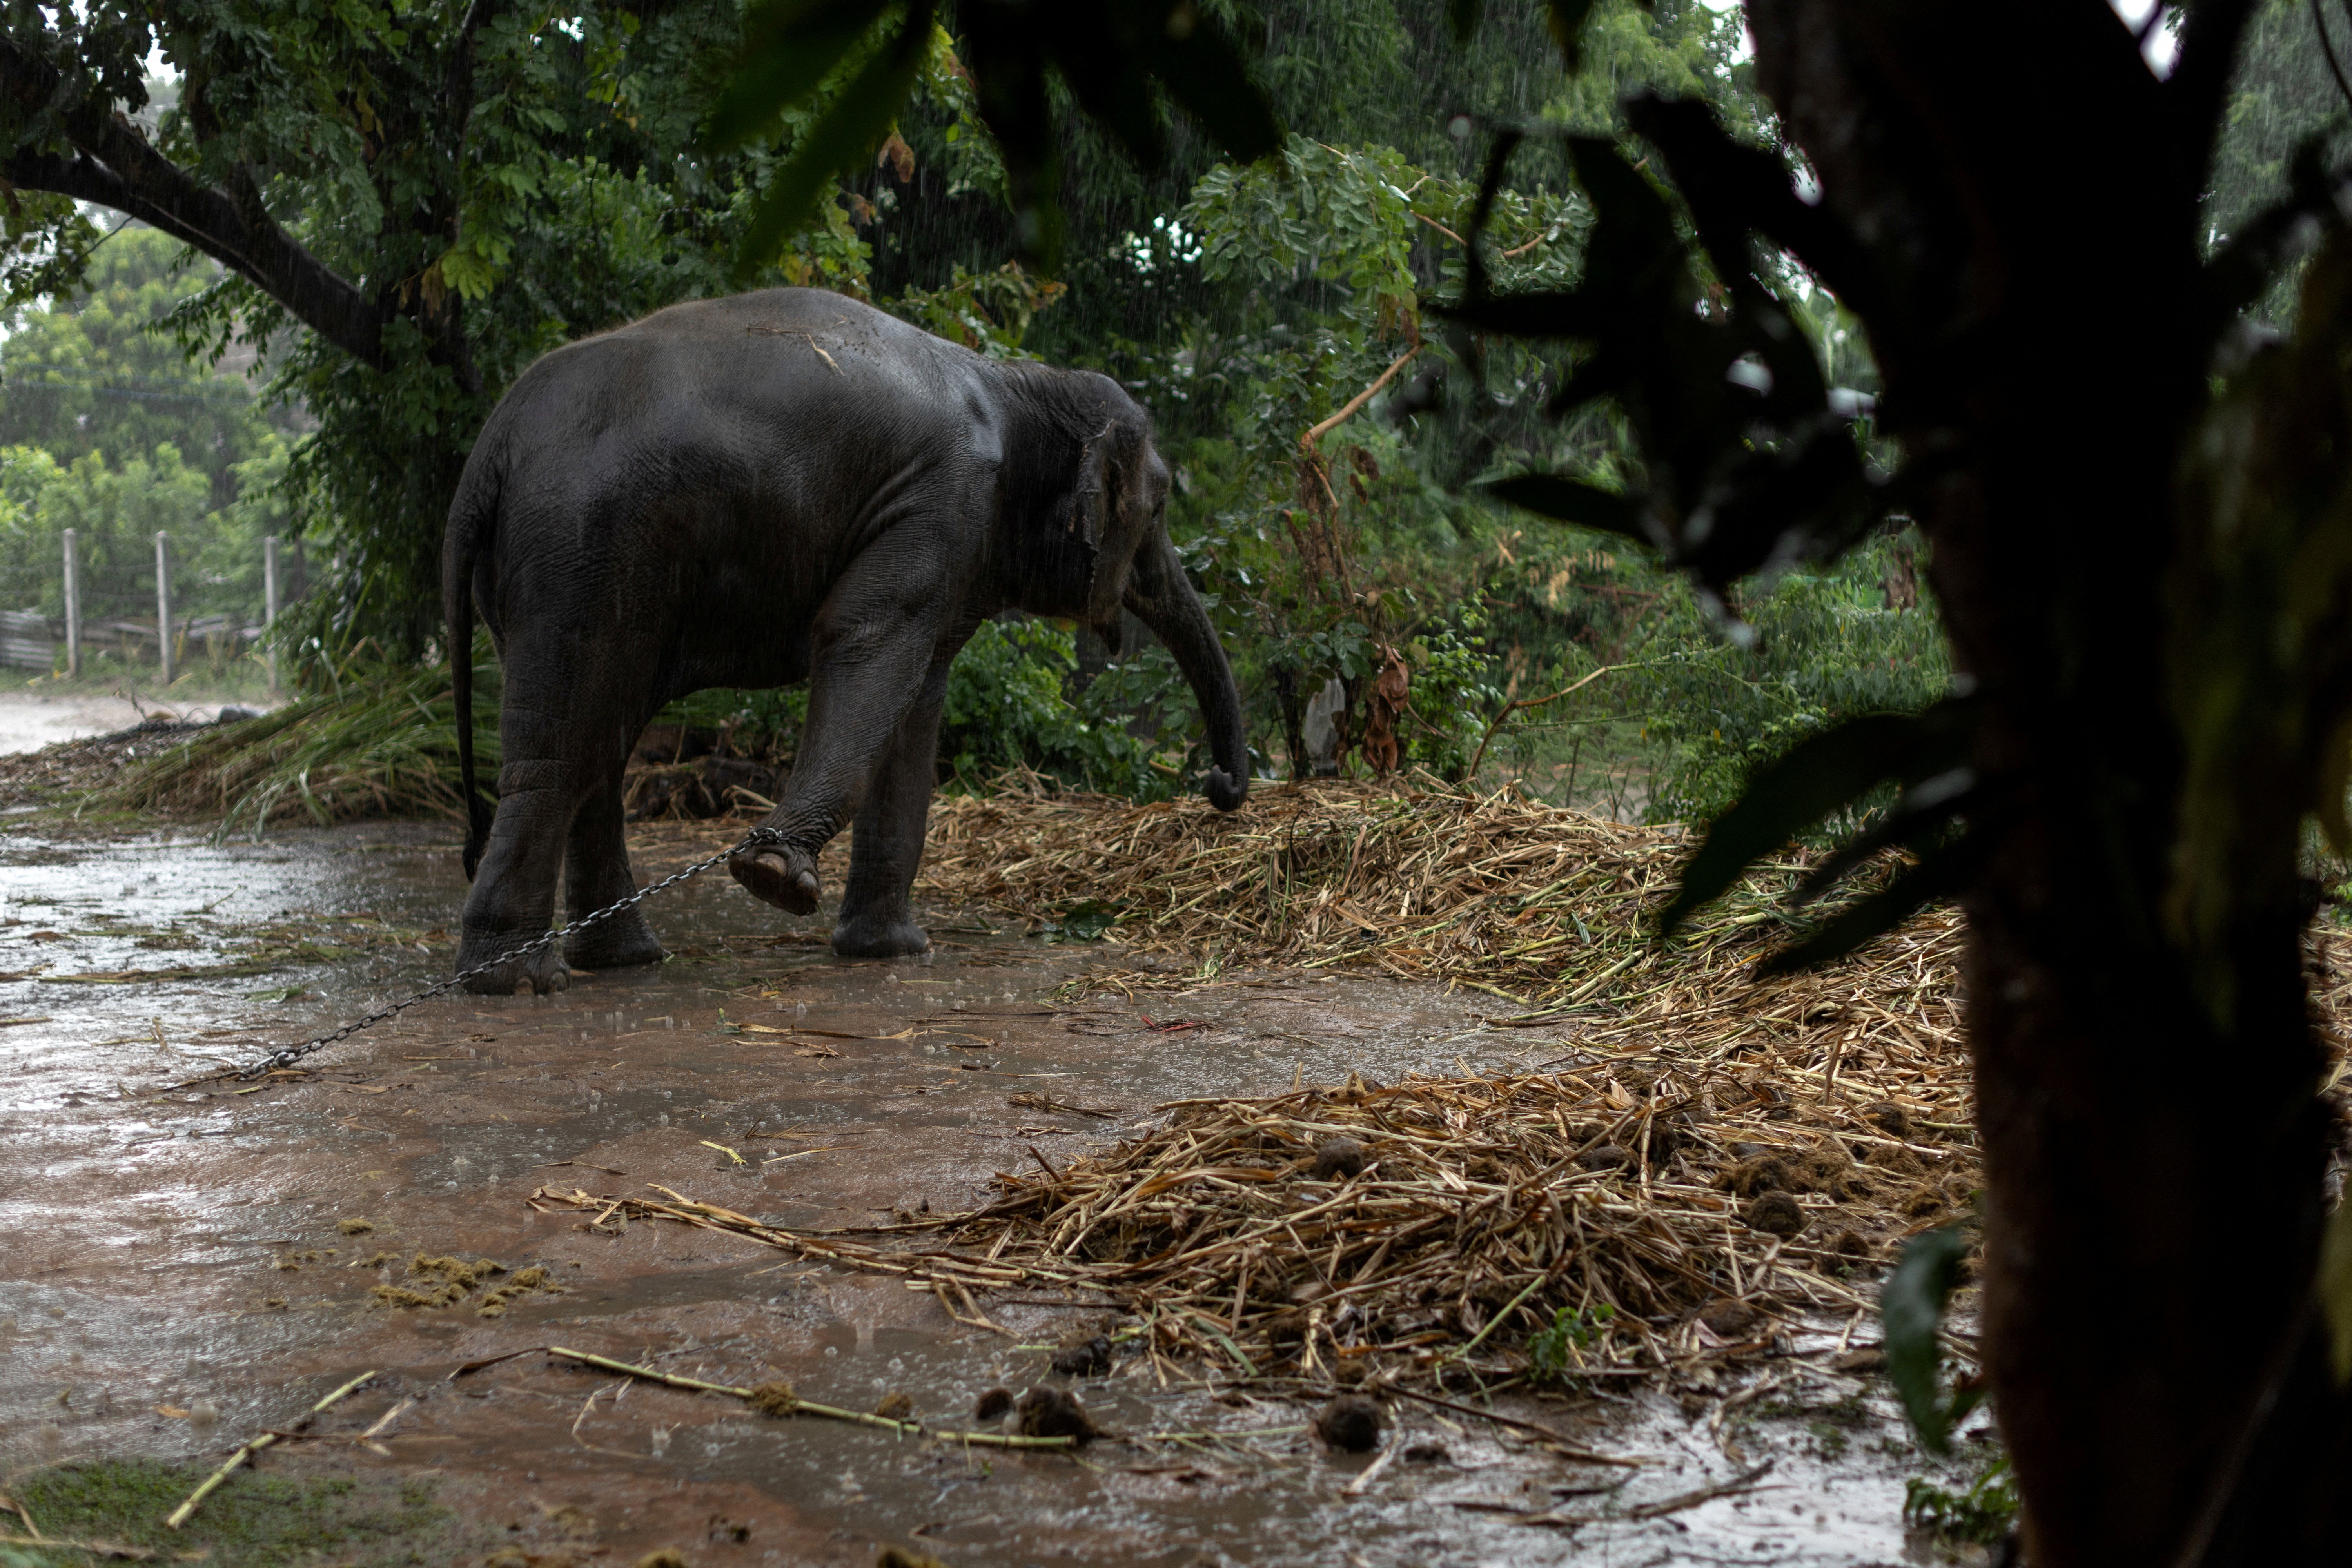 A chained elephant in the rain